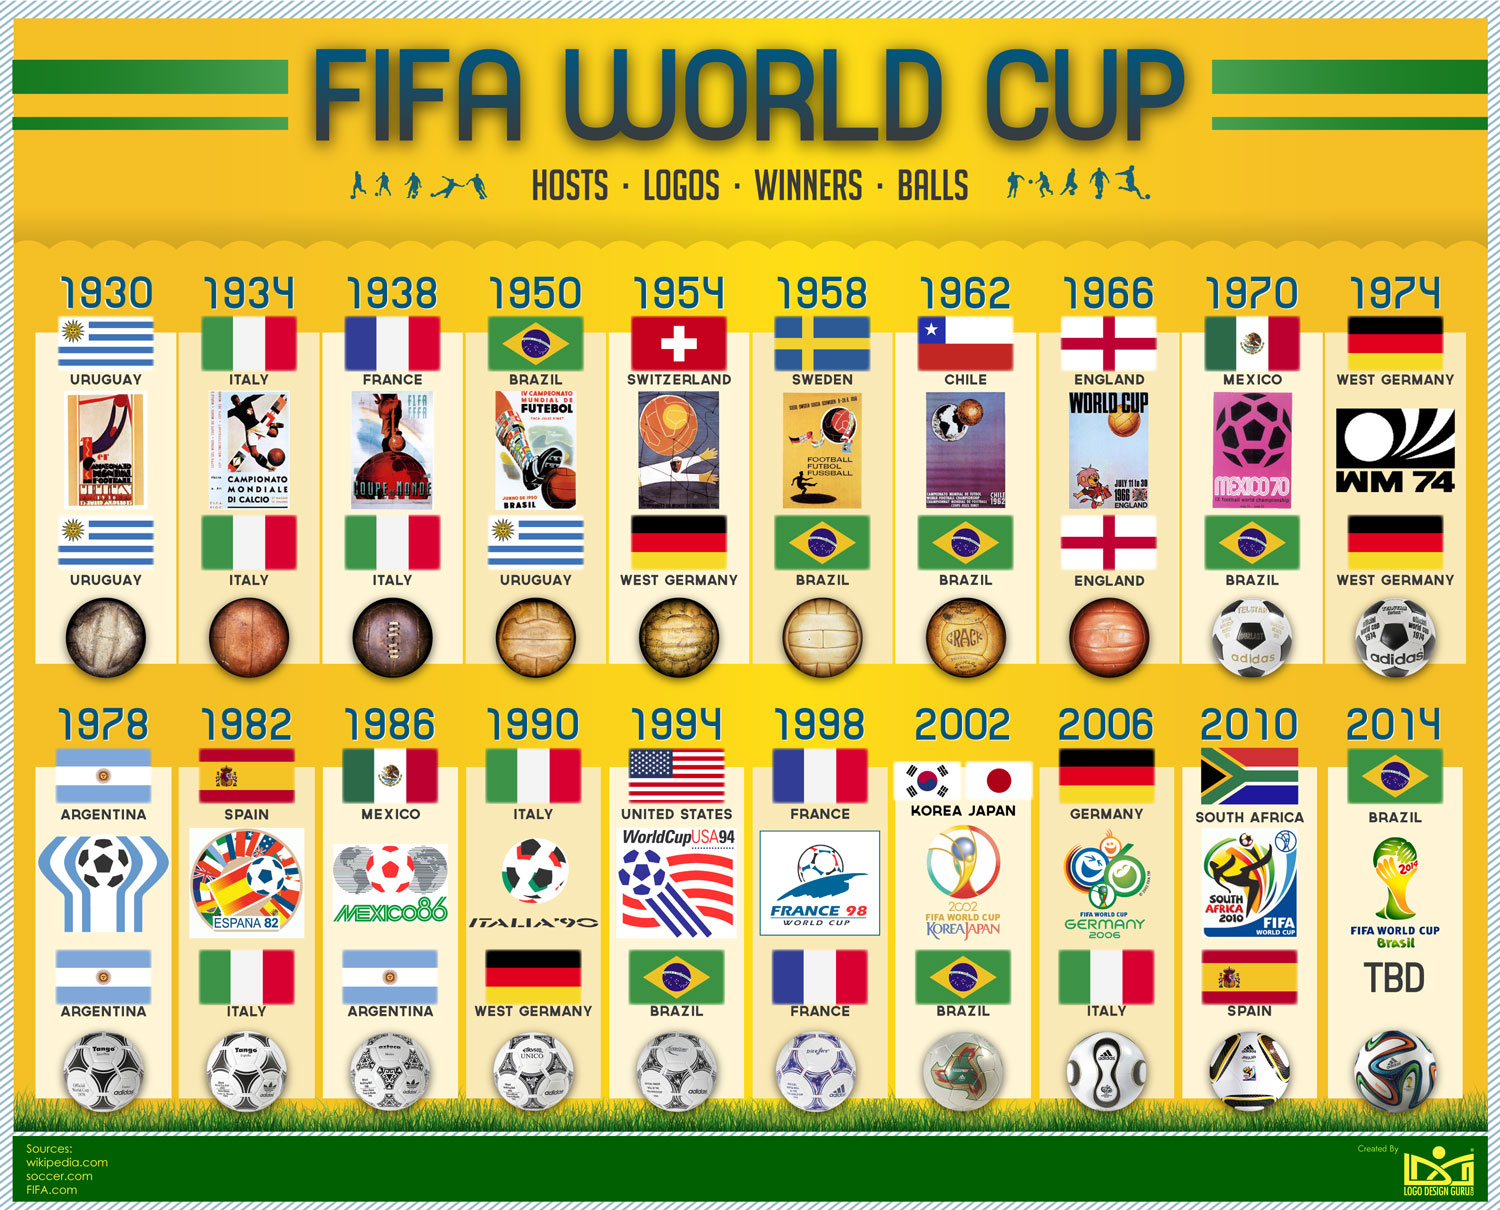 The World Cup: A graphic history